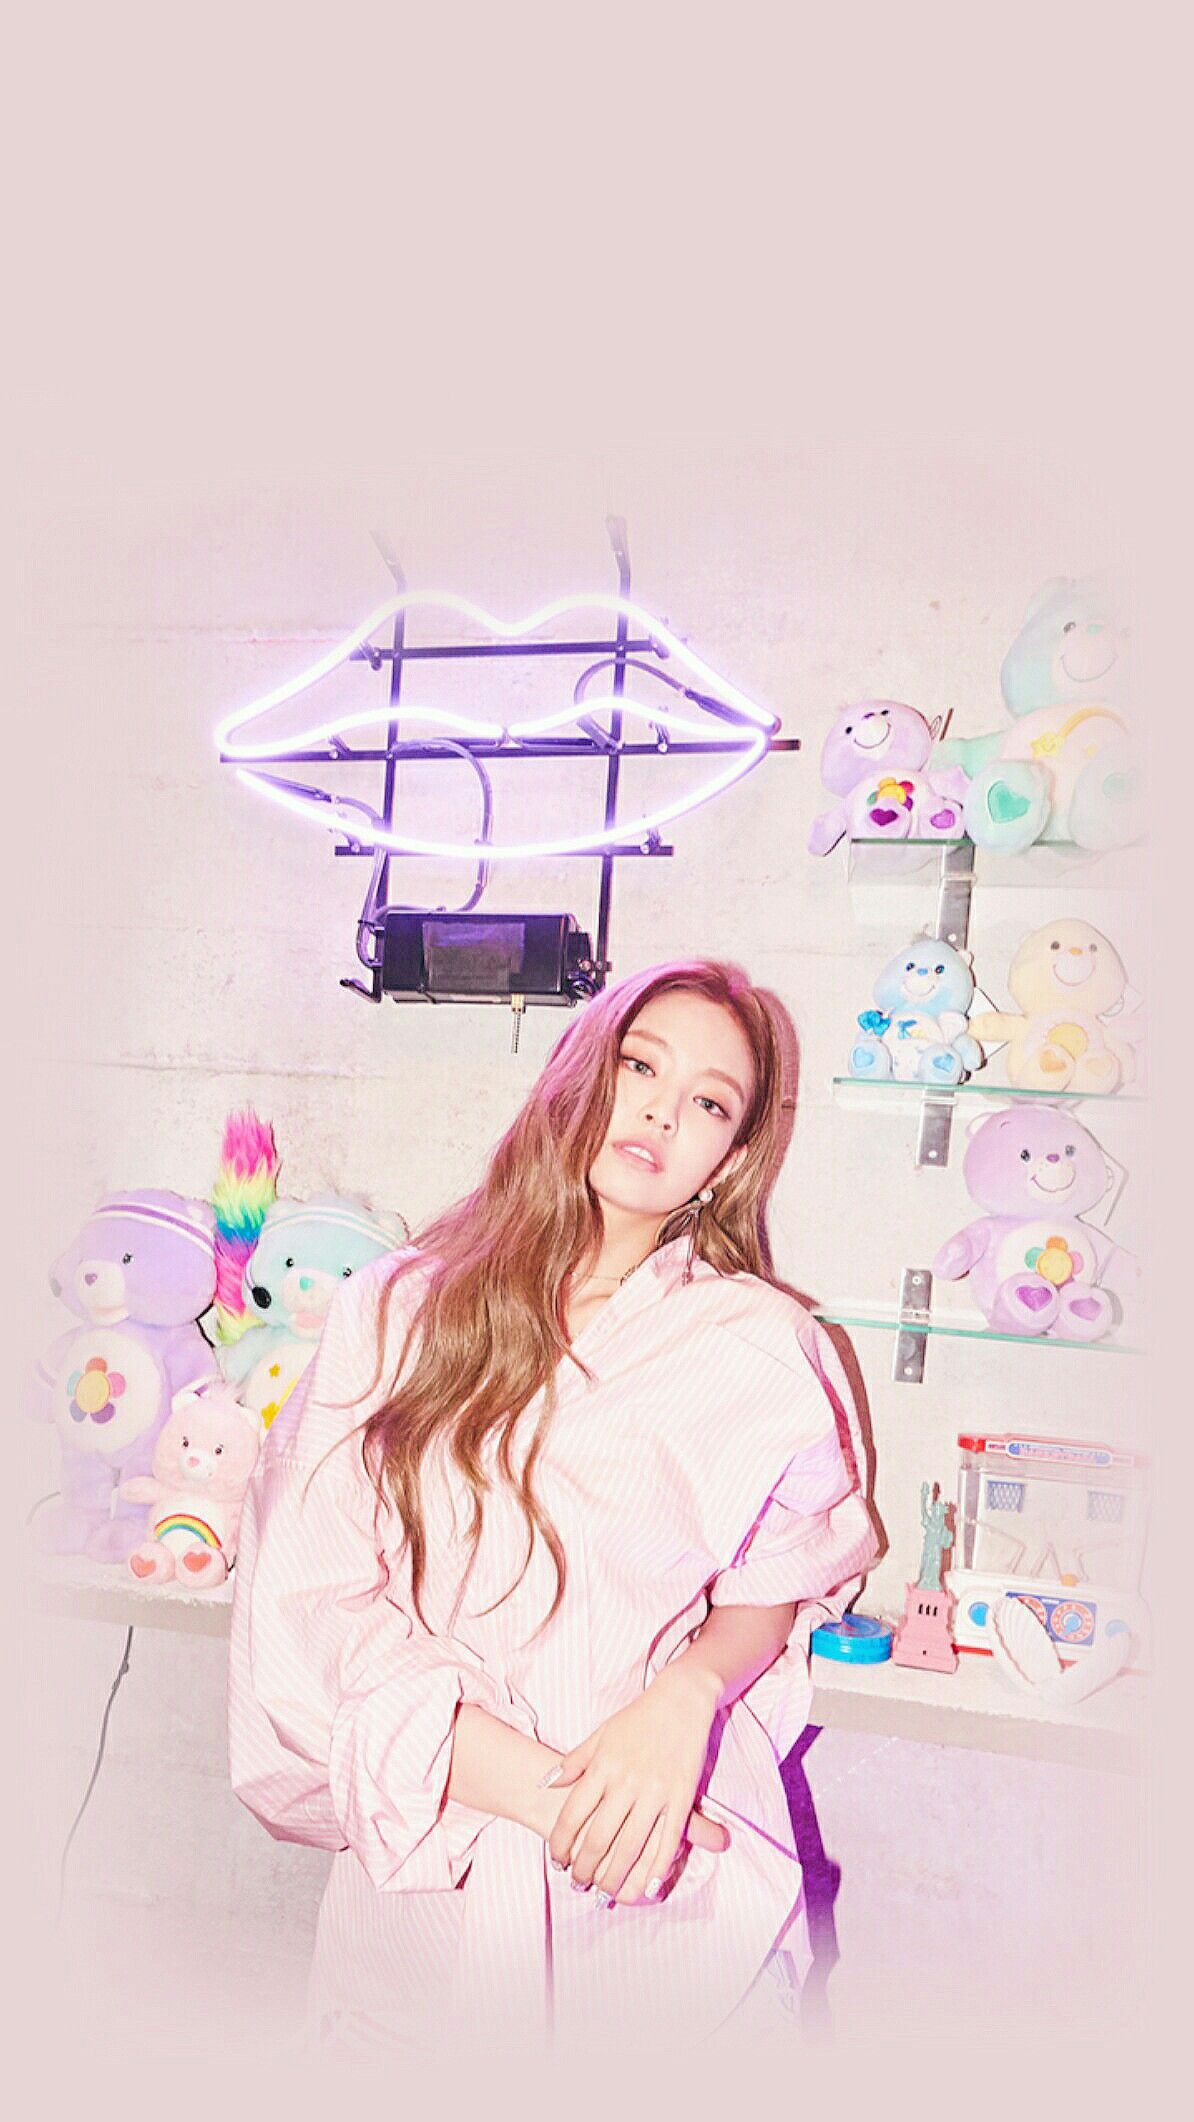 As if your last jennie wallpaper